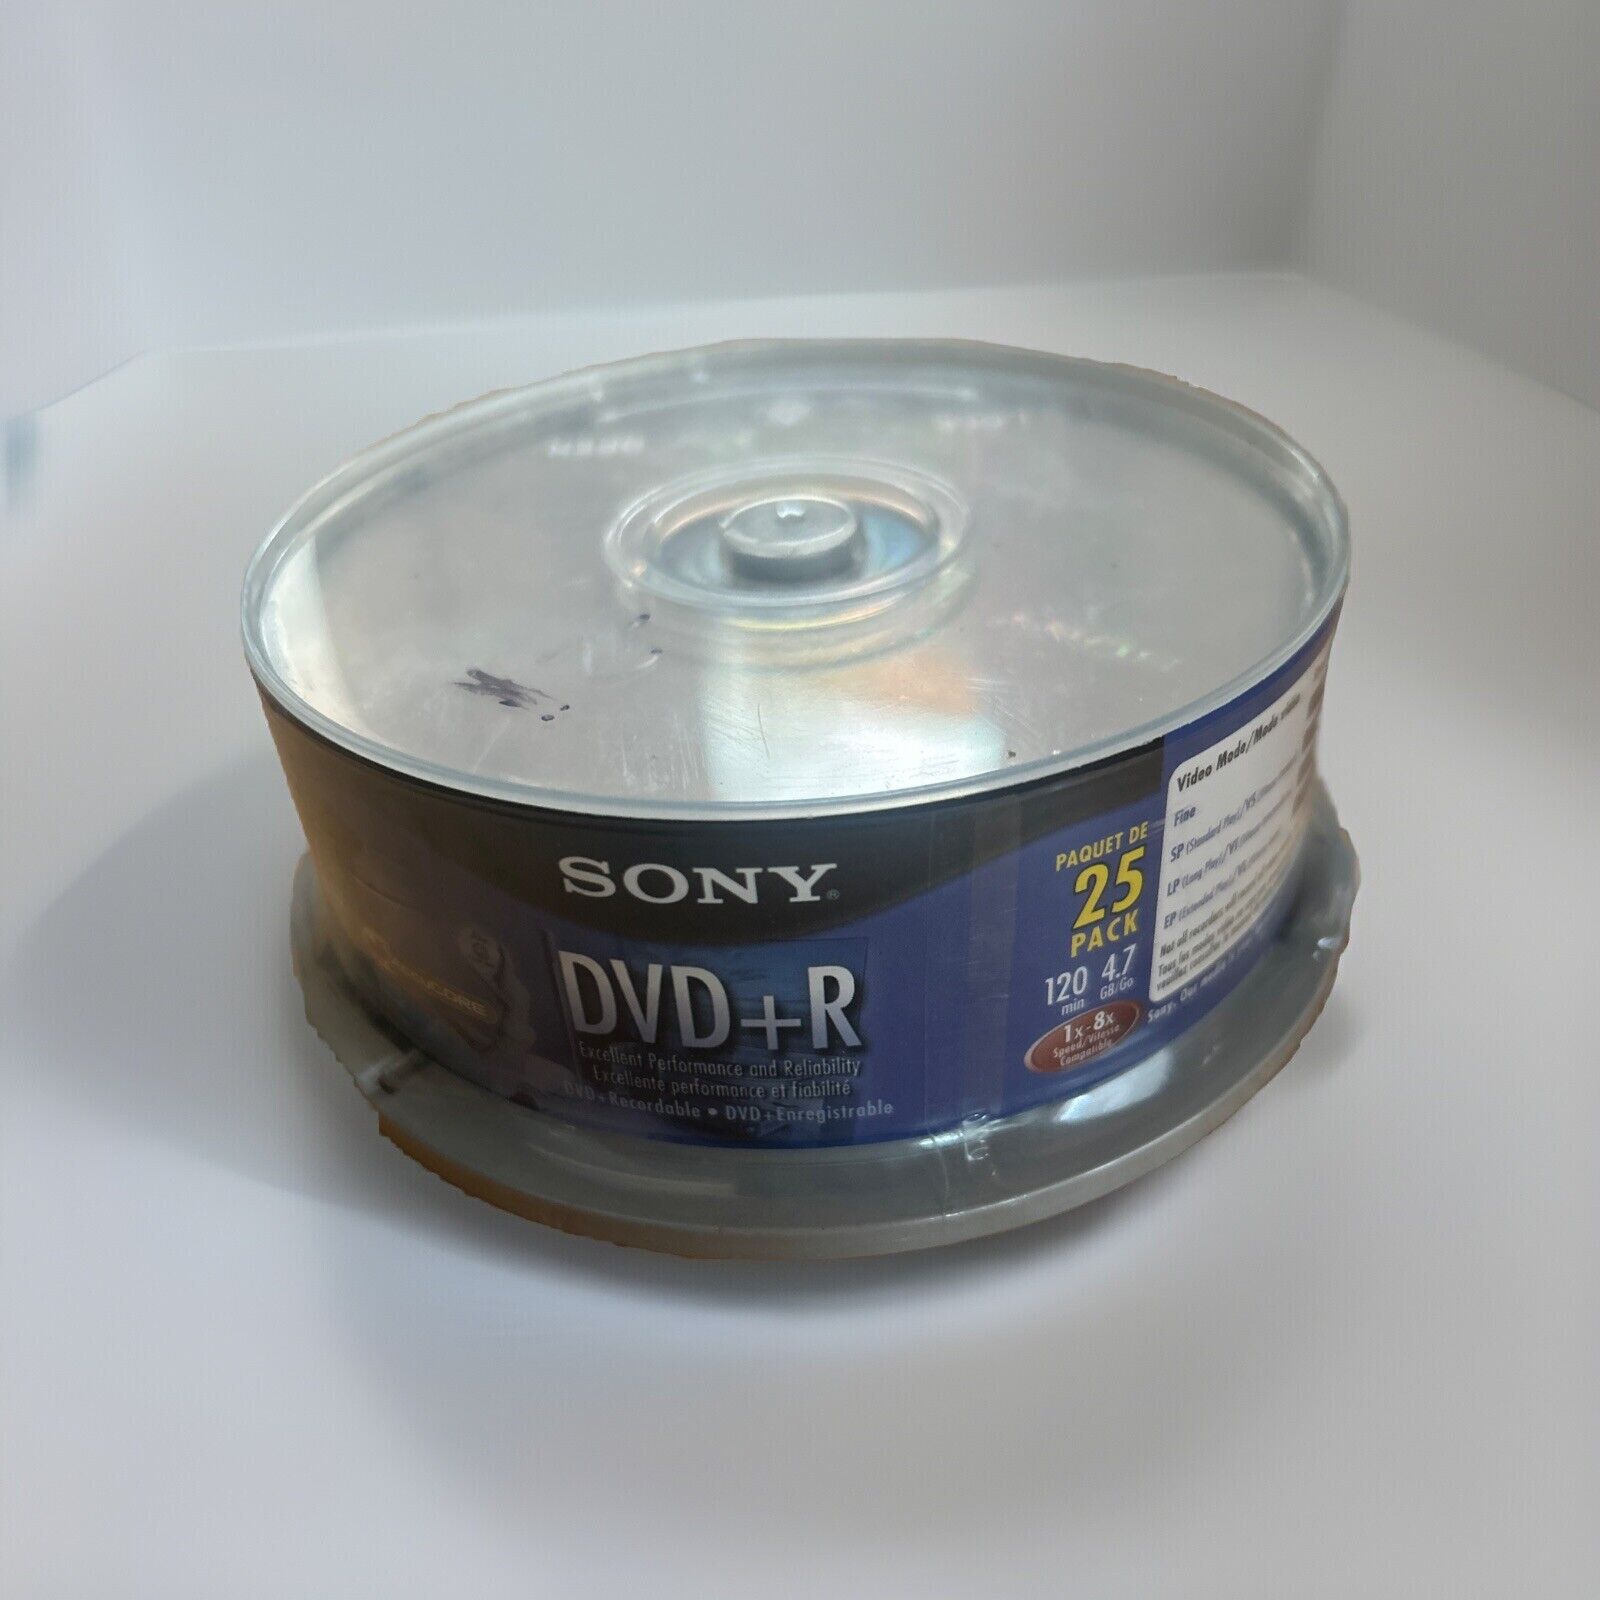 SONY DVD+R  8X / 4.7GB / 120 Min - 25 Pack Spindle